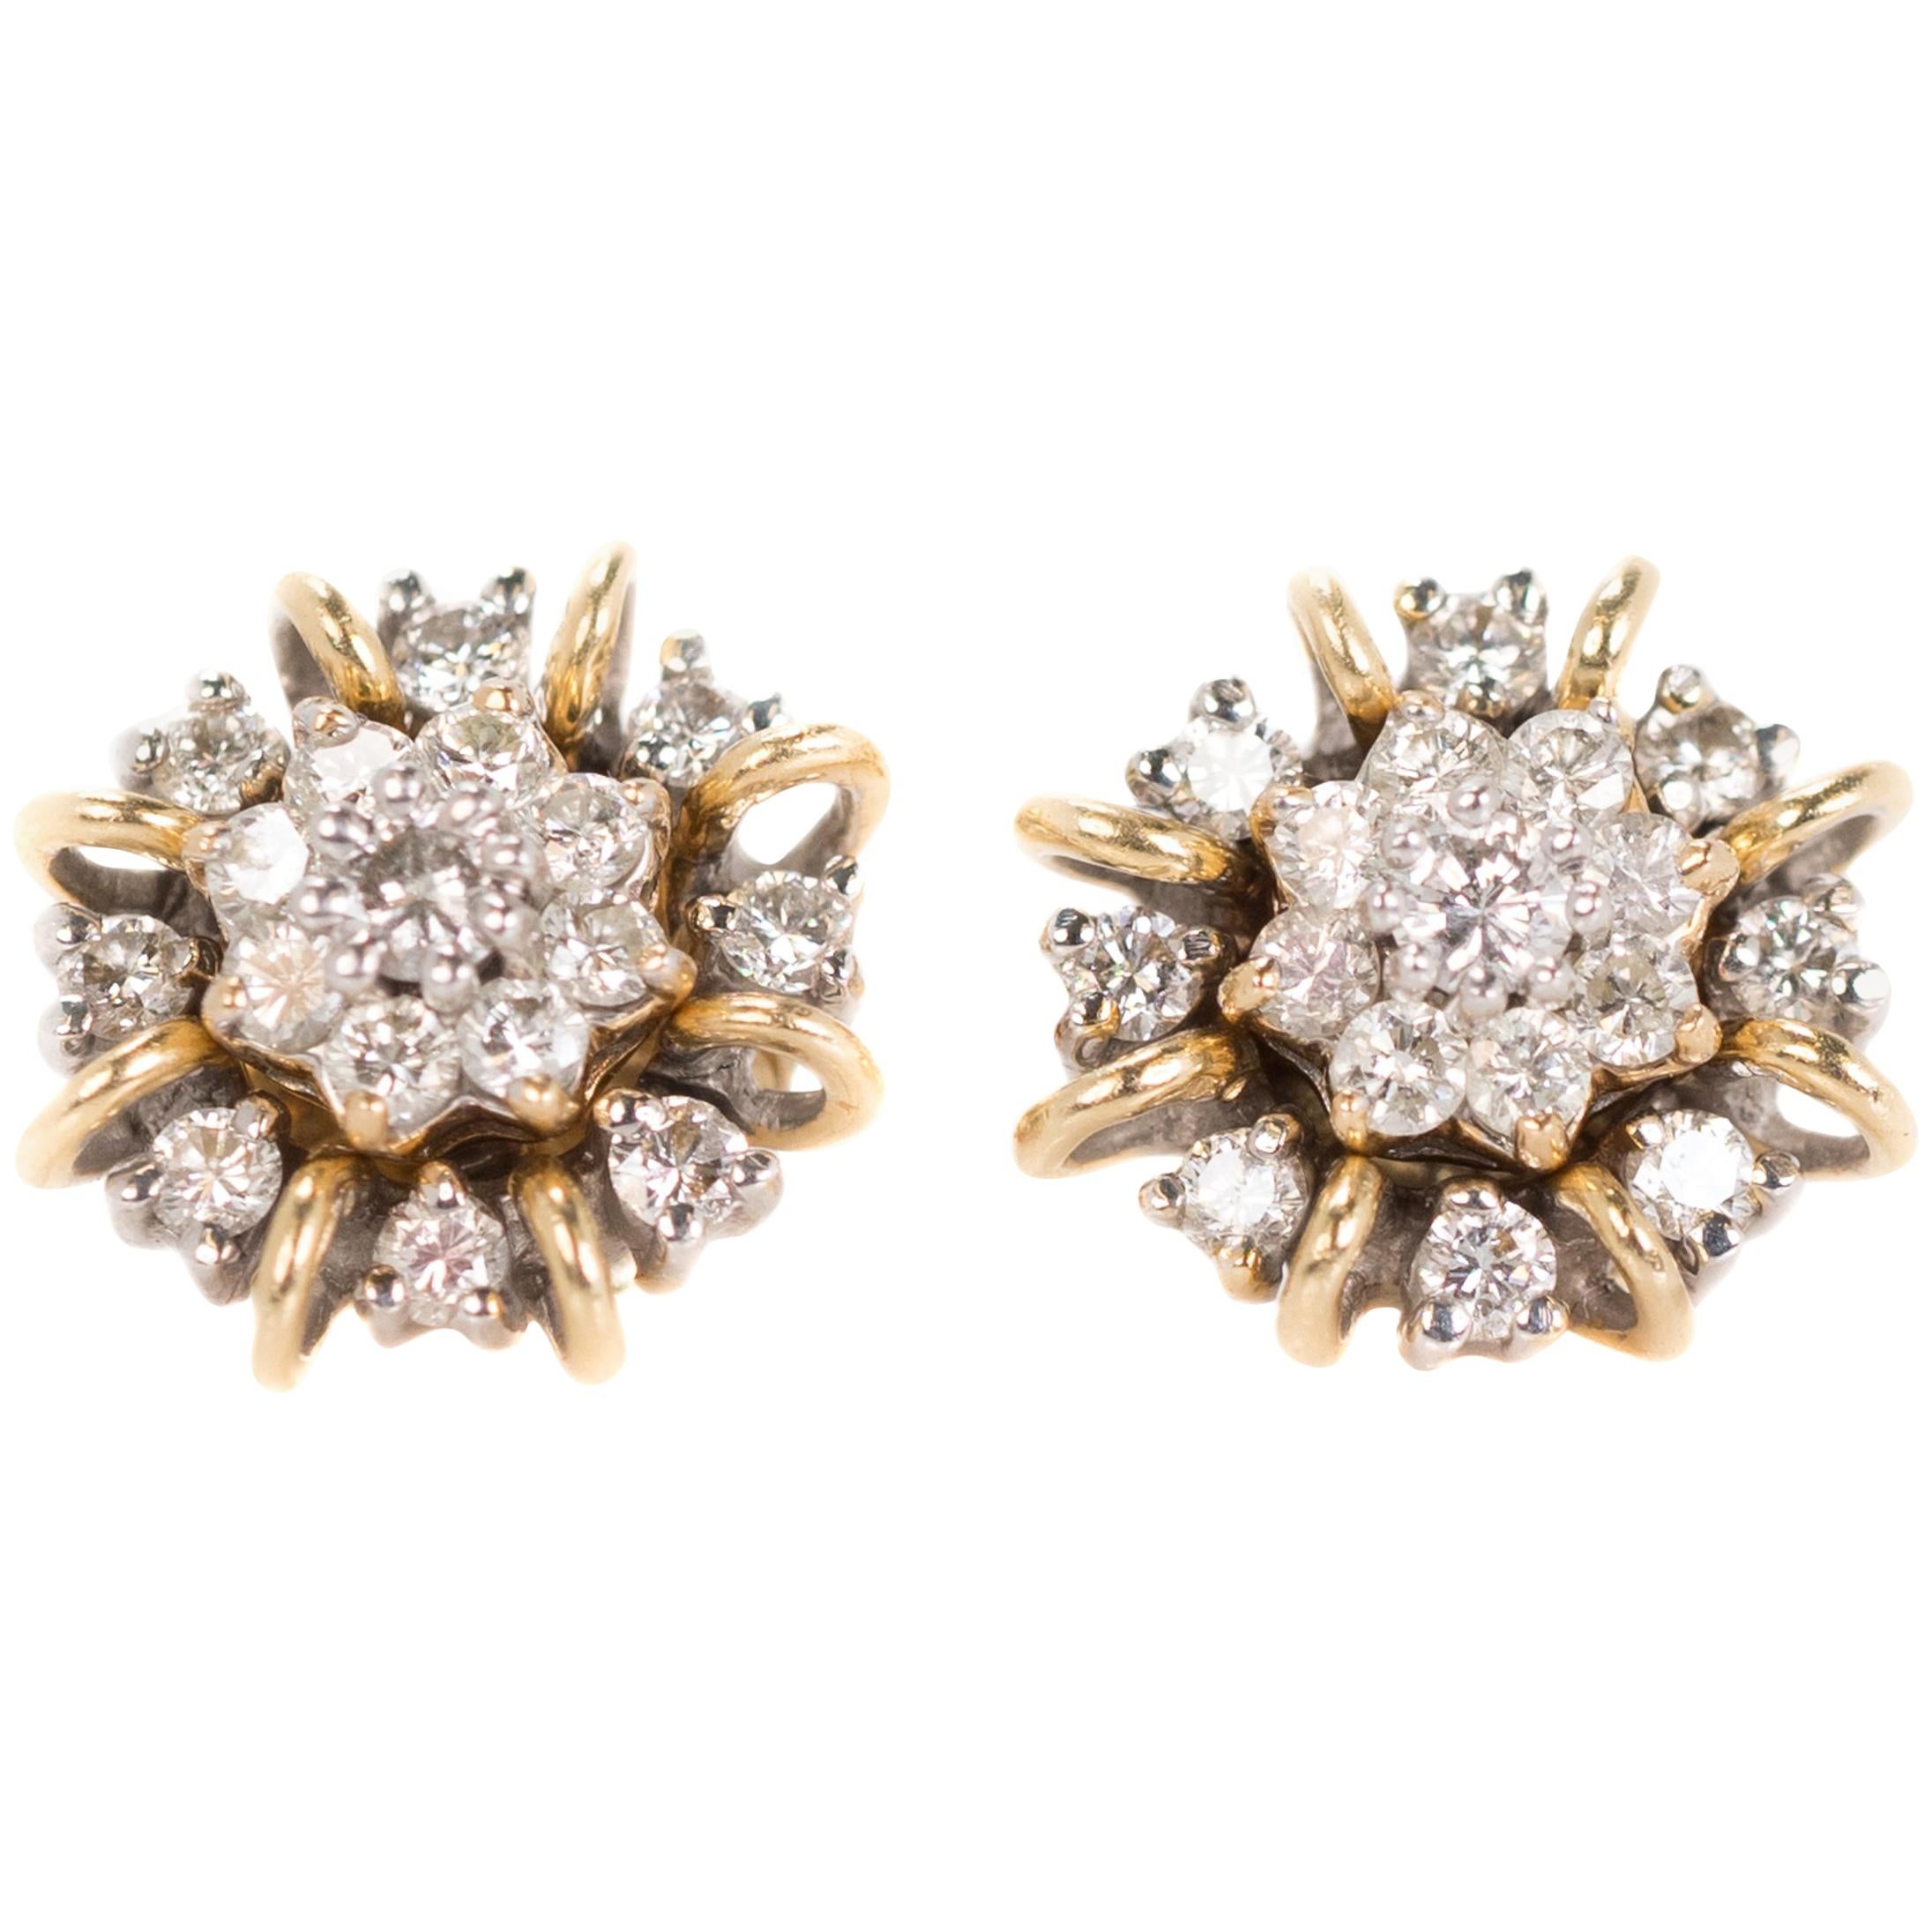 1950s 1 Carat Total Diamond Earrings with Jackets